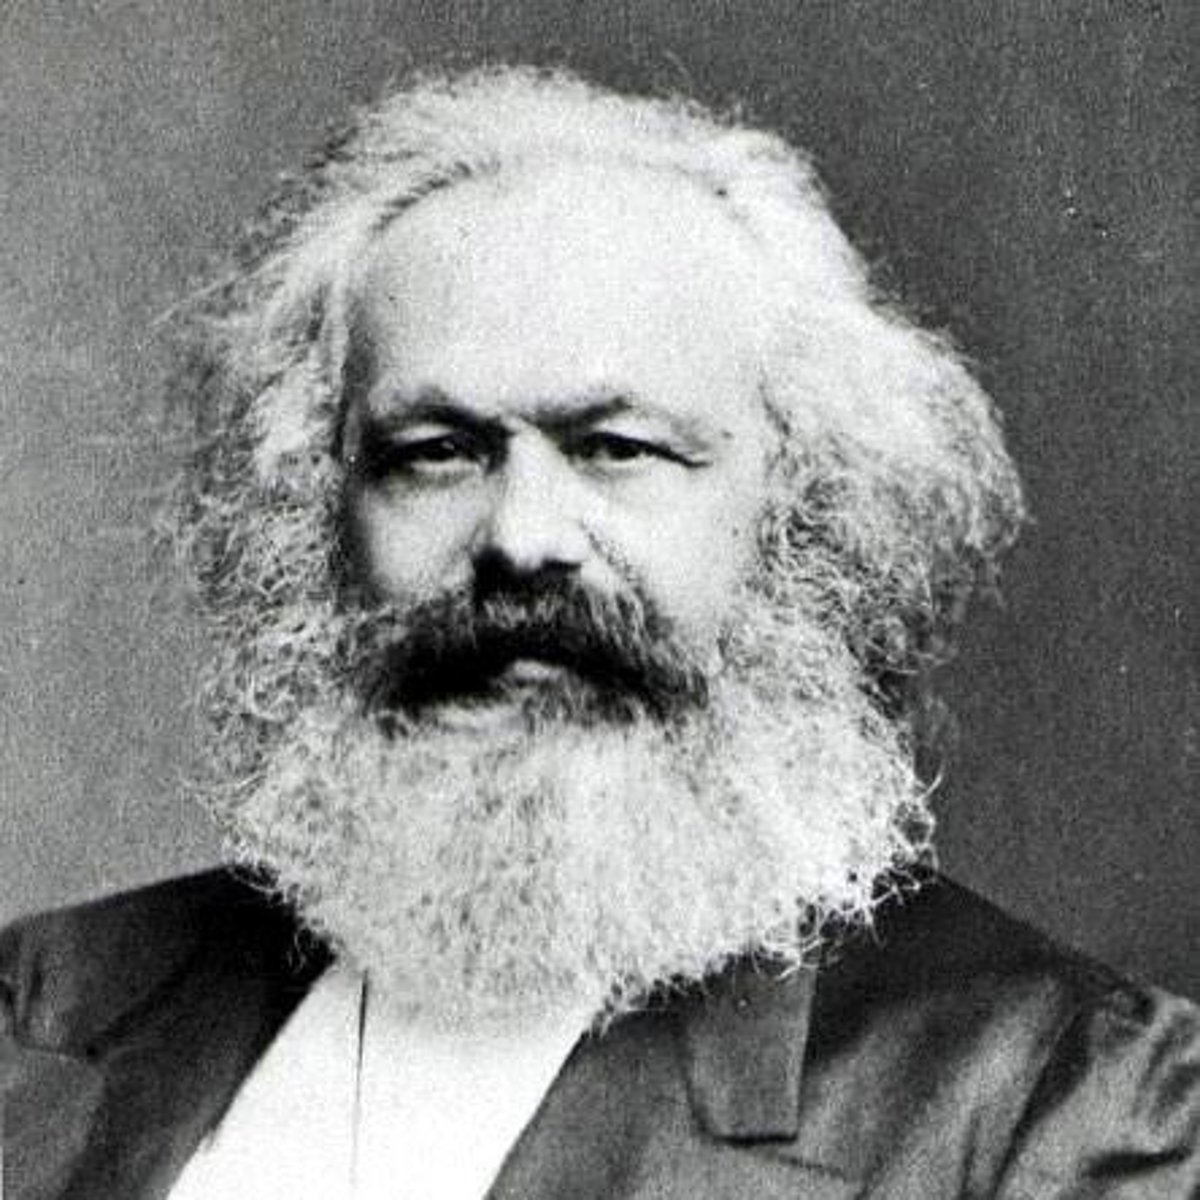 <p>1818-1883. 19th century philosopher, political economist, sociologist, humanist, political theorist, and revolutionary. Often recognized as the father of communism. Analysis of history led to his belief that communism would replace capitalism as it replaced feudalism. Believed in a classless society.</p>